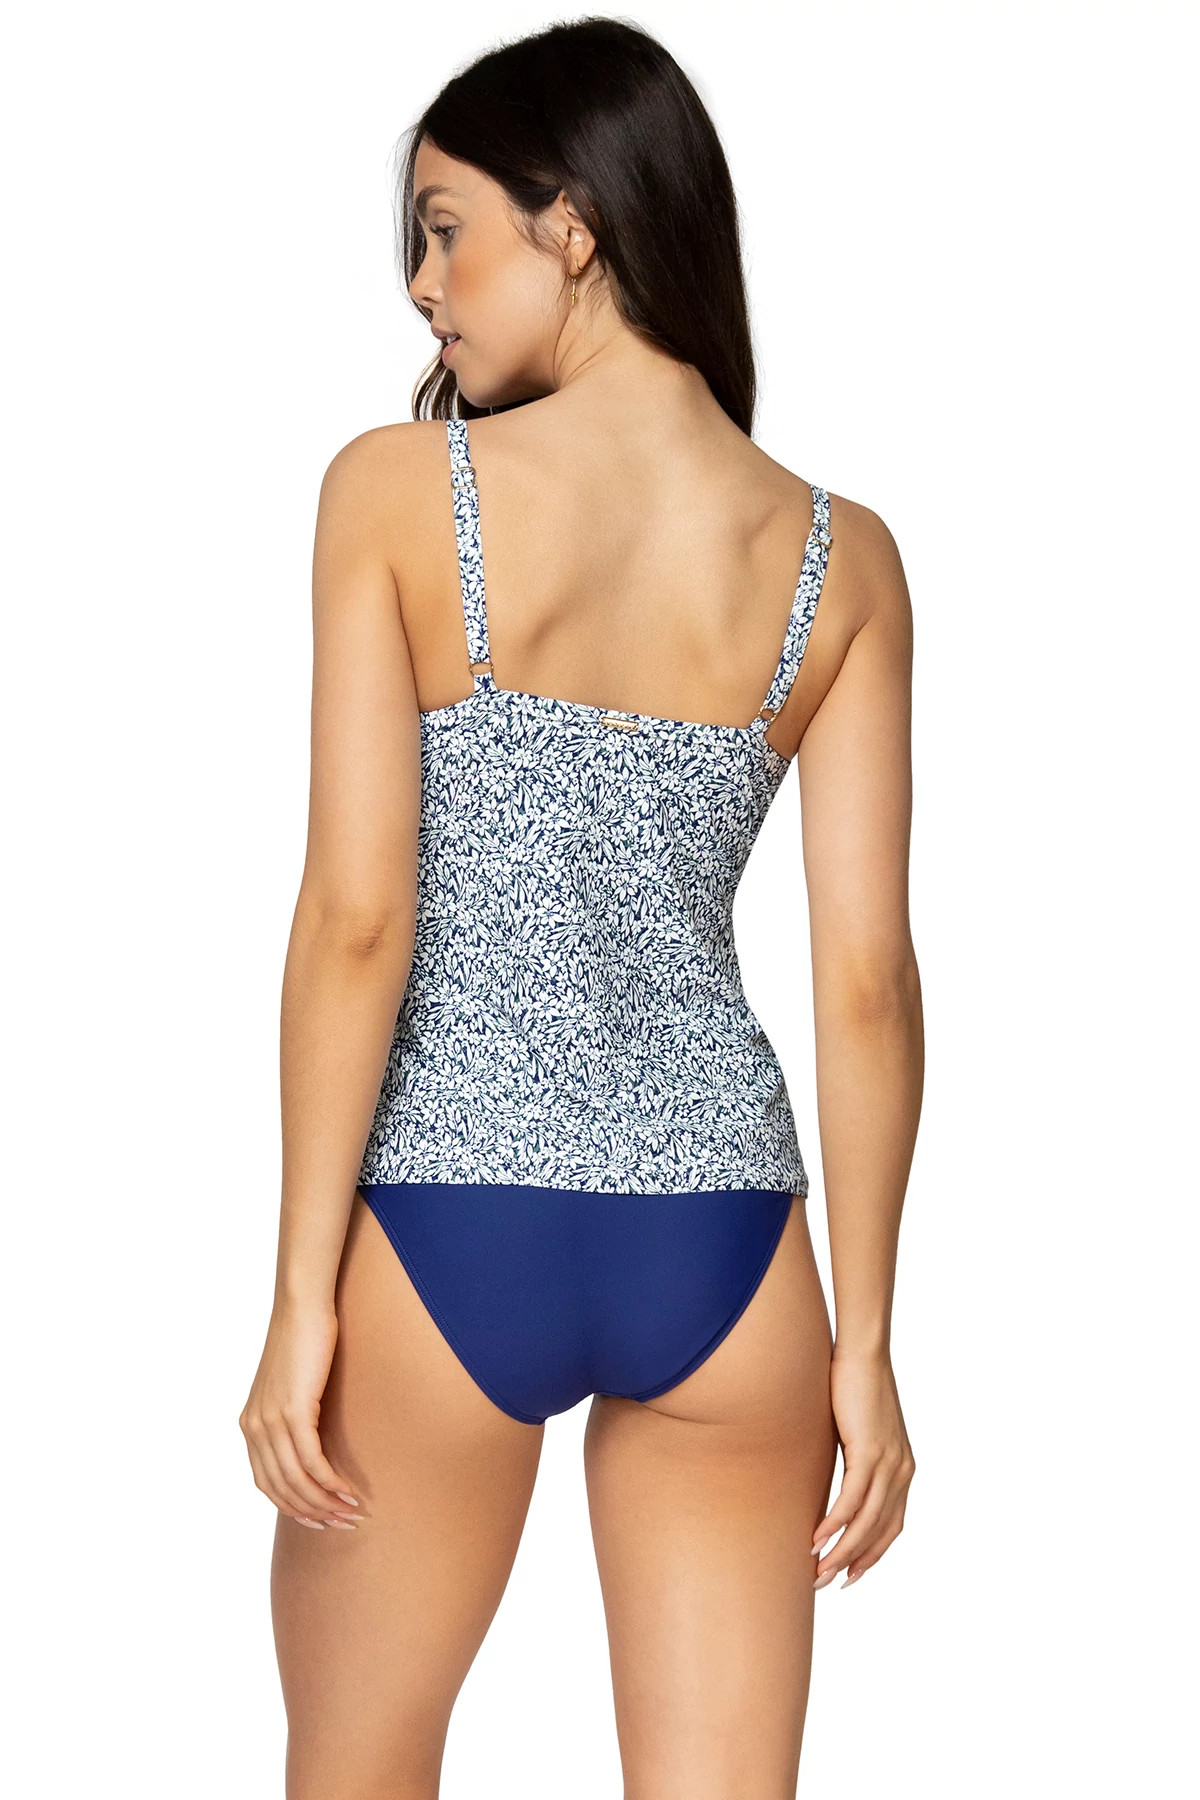 FORGET ME NOT Forever Underwire Bra Tankini Top (E-H Cup) image number 2